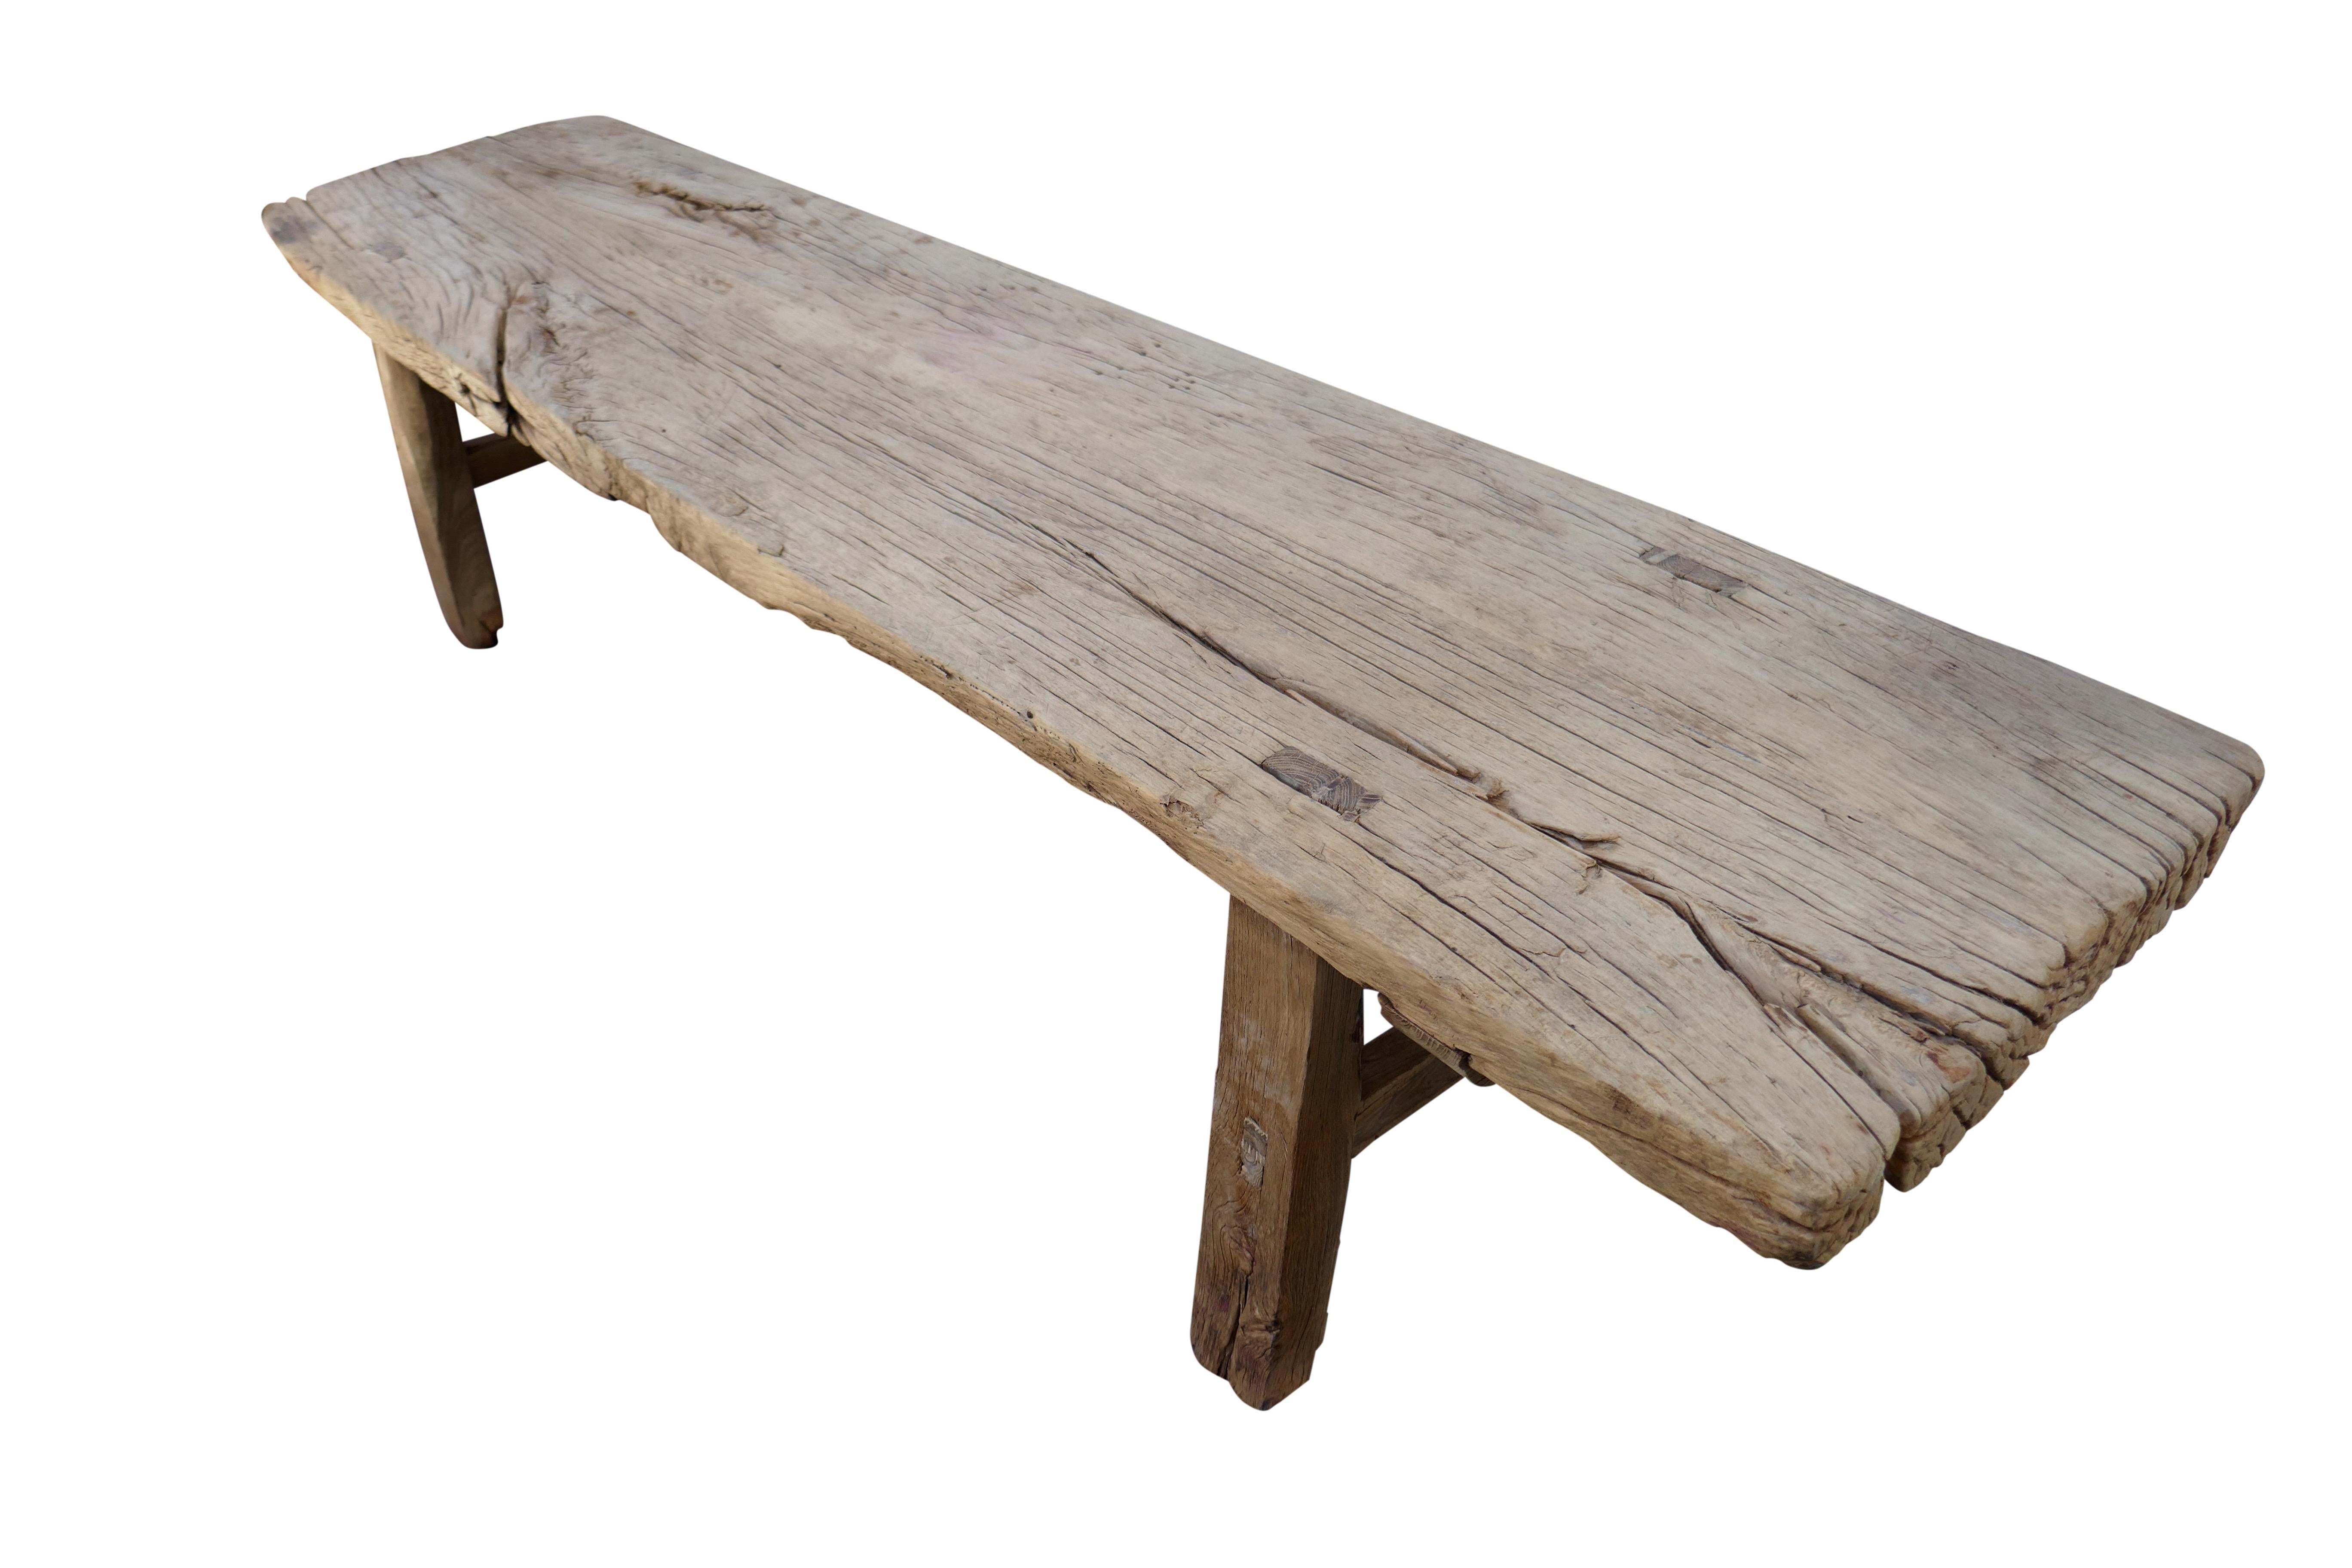 Authentic antique rustic elmwood bench/table. This one-of-a-kind versatile piece features desirable natural age character throughout that only time and history can create. The natural age and use patina incorporated into the surface of the wood